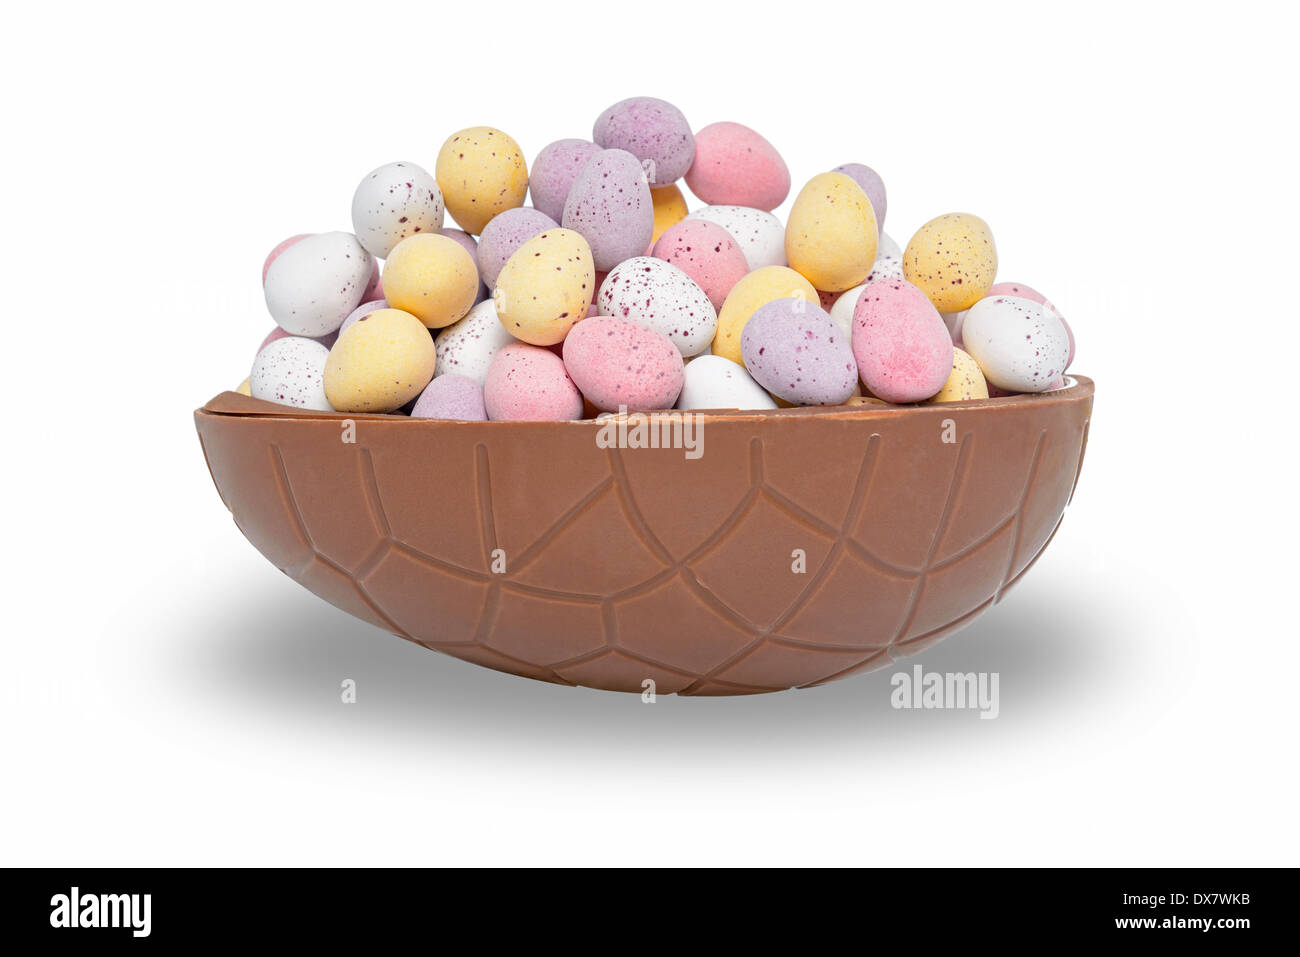 Half a chocolate Easter egg full of mini candy coated eggs, isolated on a white background. Stock Photo